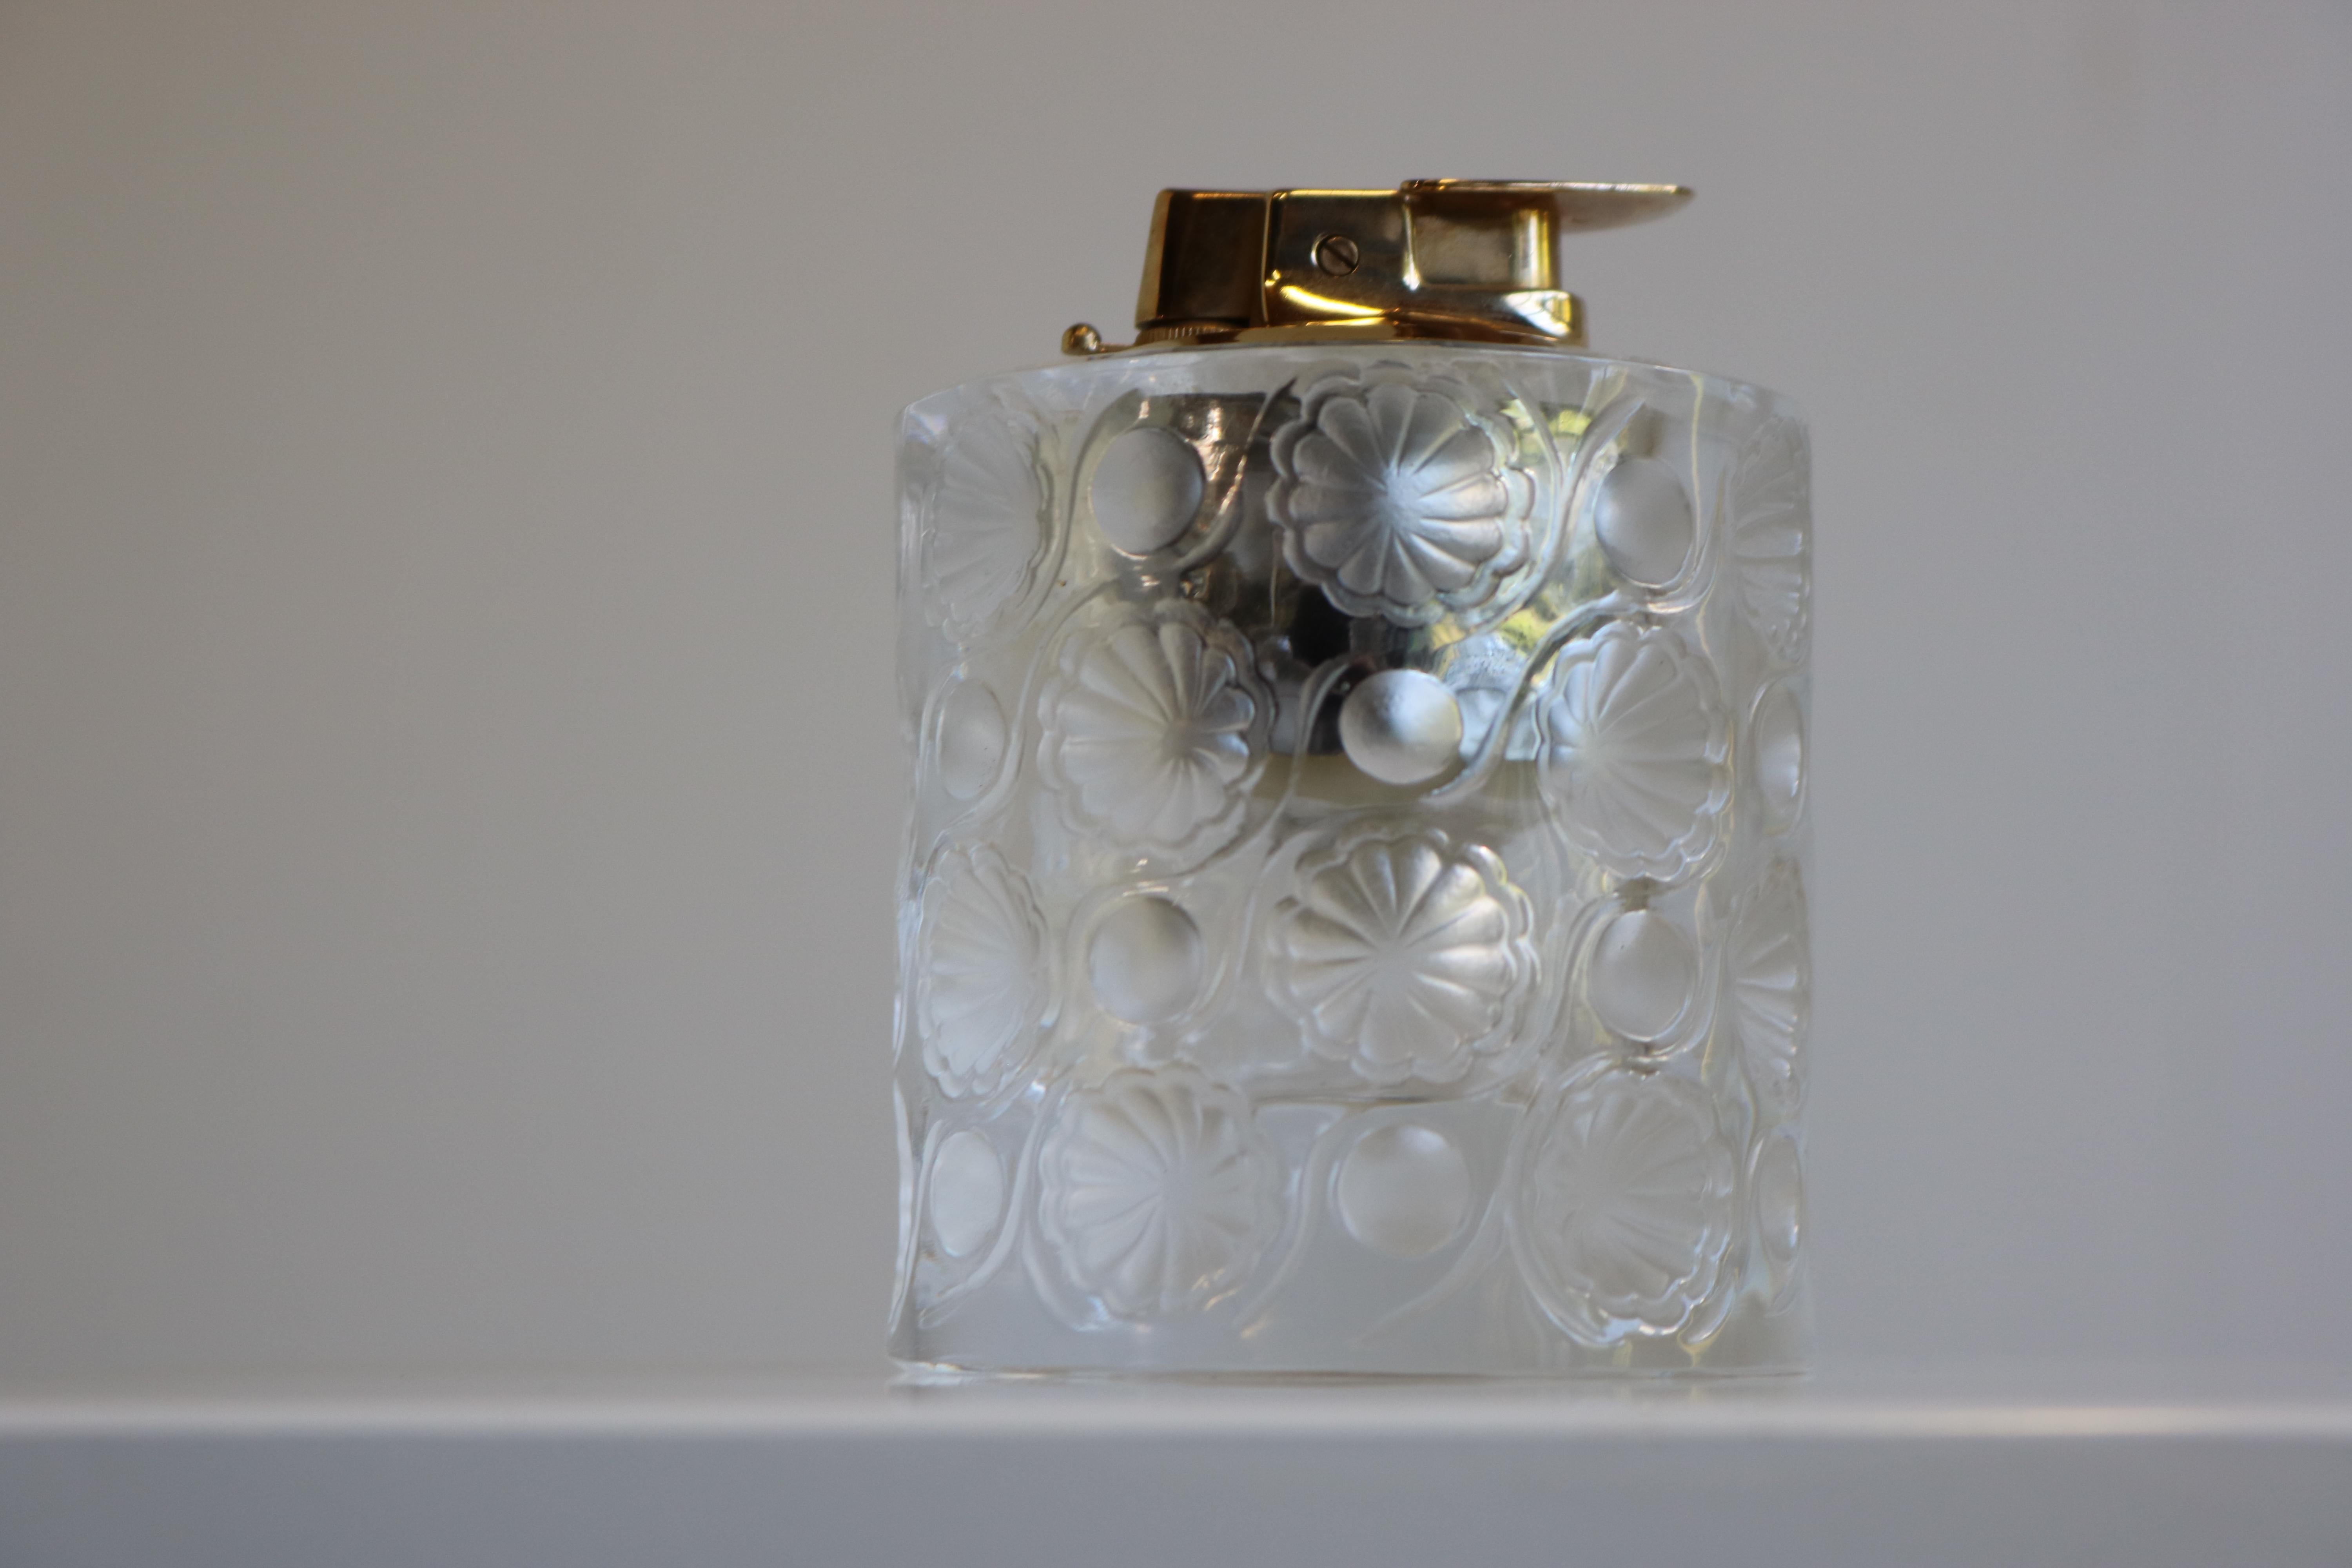 When it comes to defining elegance and affluence as a lifestyle, Lalique crystal comes to mind for most people. From its earliest days to present times, the Lalique Company has consistently tantalized the world with its exquisite glass and crystal